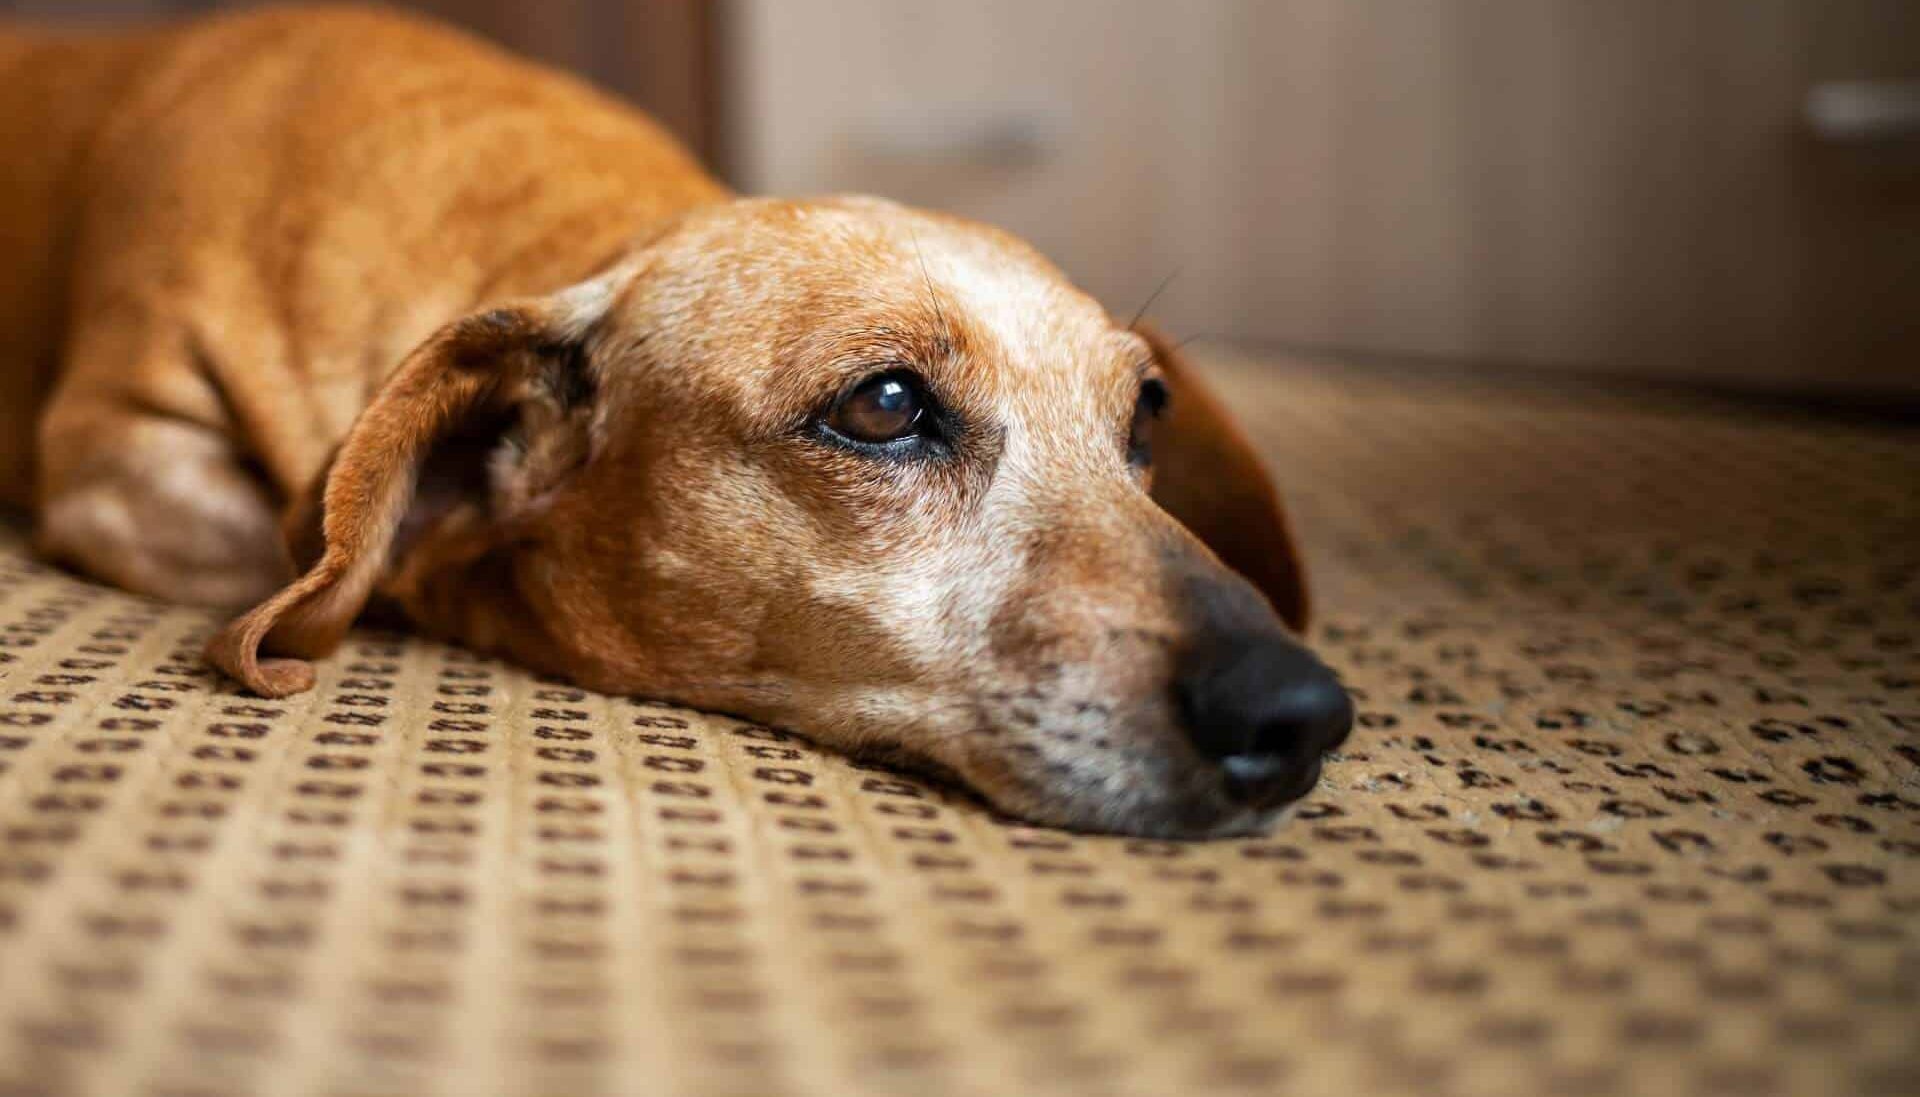 Read How Does Heartworm Treatment Impact a Dog’s Prognosis and Lifespan? by Peter Astle